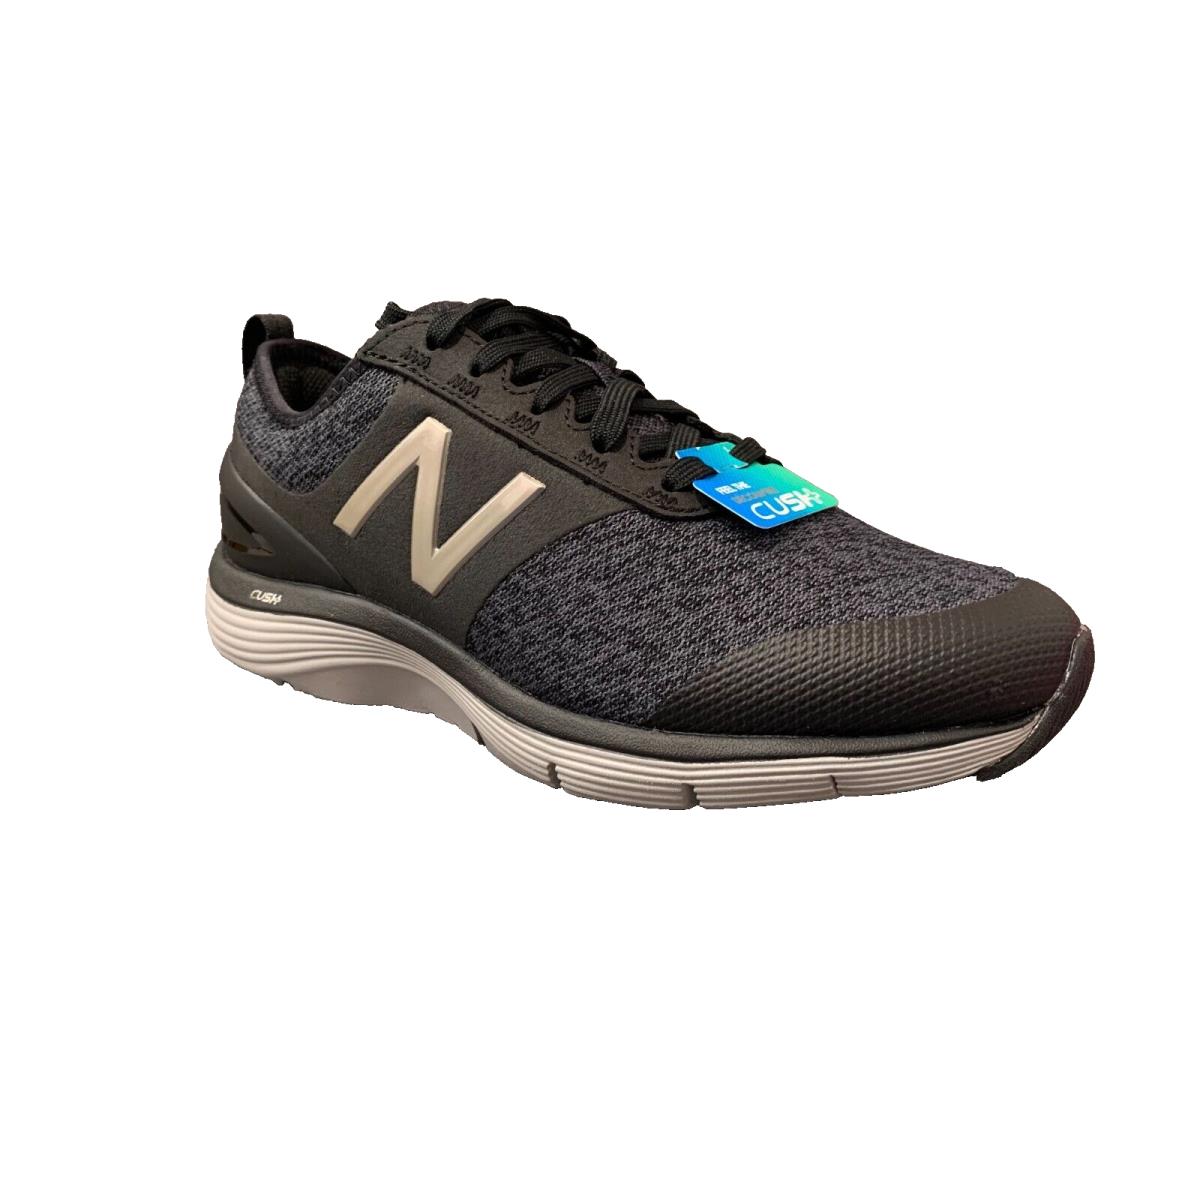 New Balance Mens MW955 BK2 Athletic Shoes Black Grey Sneakers Width - Wide